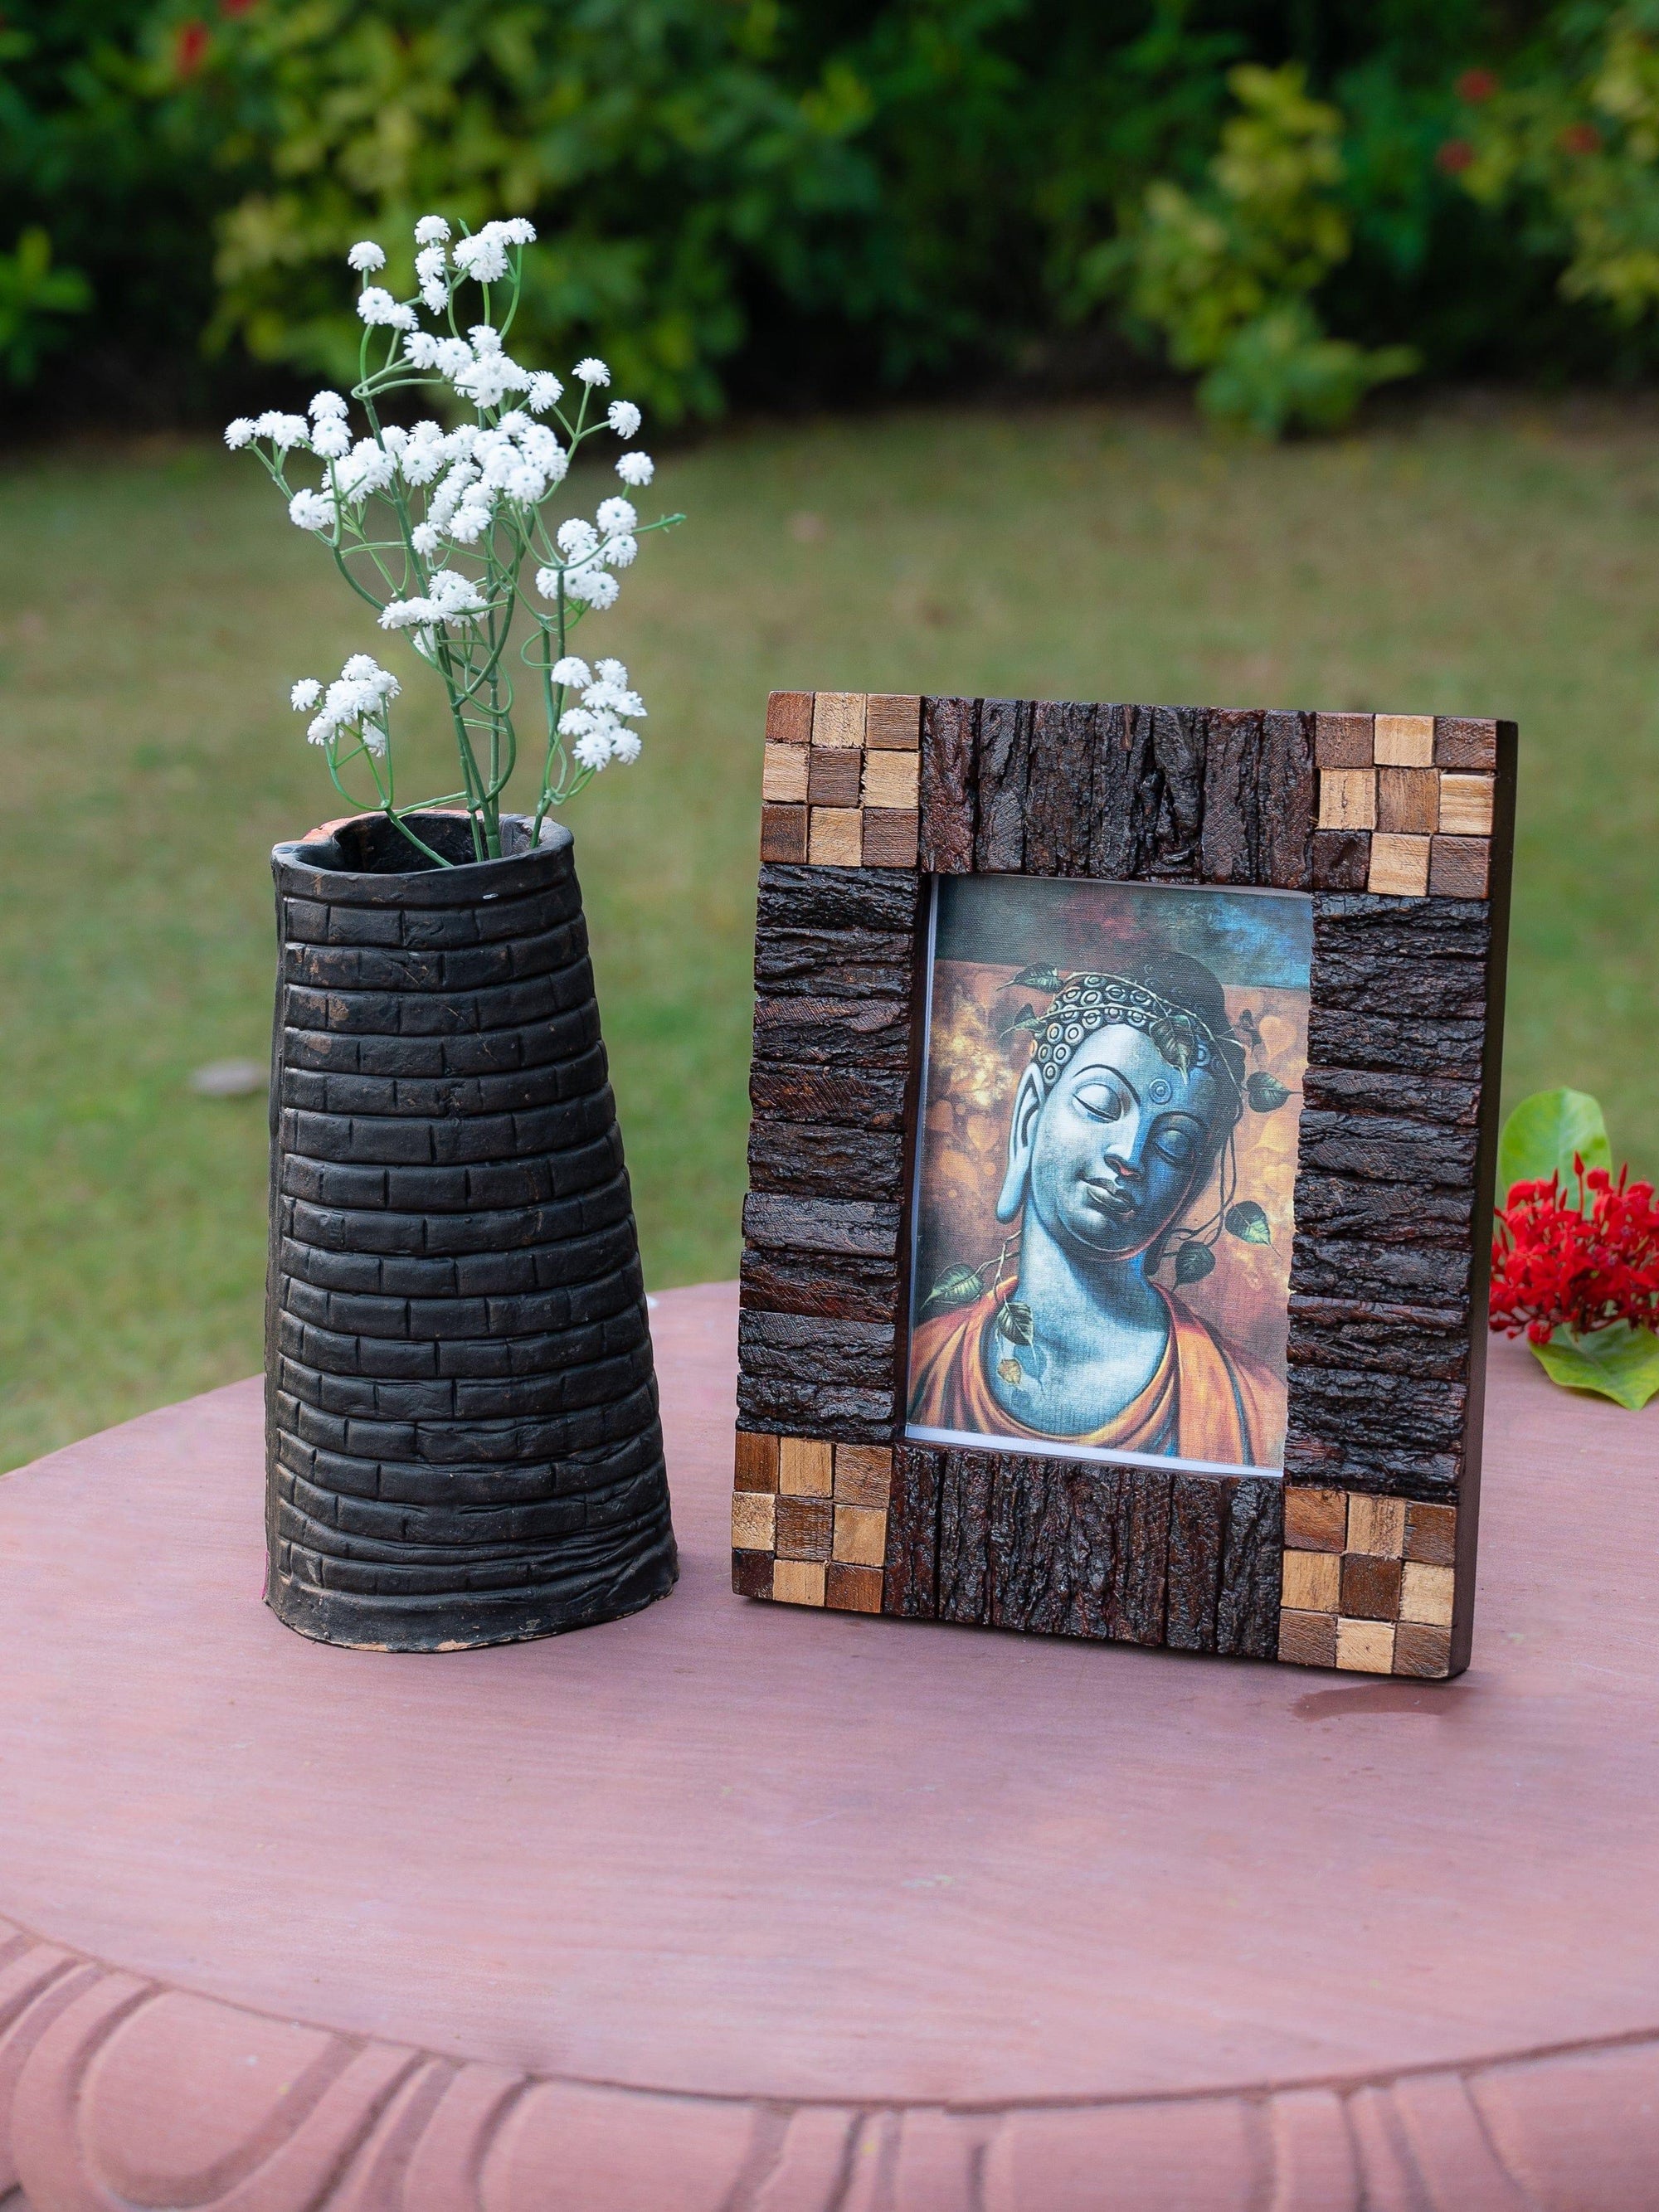 Bamboo Work Table Top Photo Frame in Dual Tone Color - Photo size 14x20 cms - The Heritage Artifacts